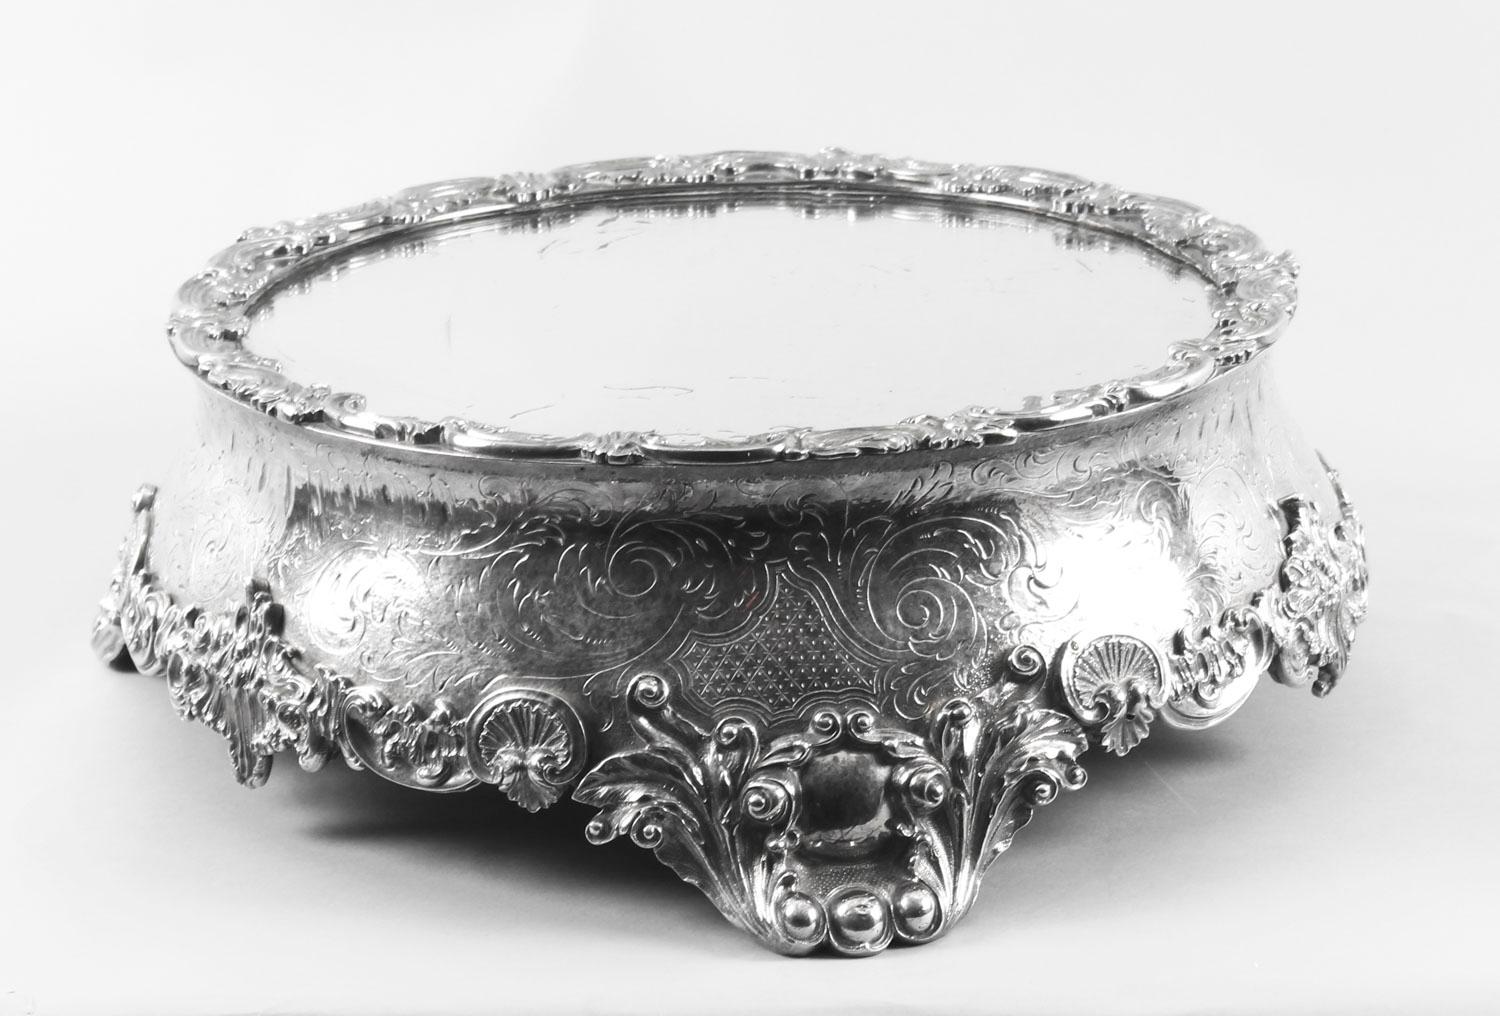 Antique English Silver Plated Mirrored Top Cake Stand, 19th Century 1